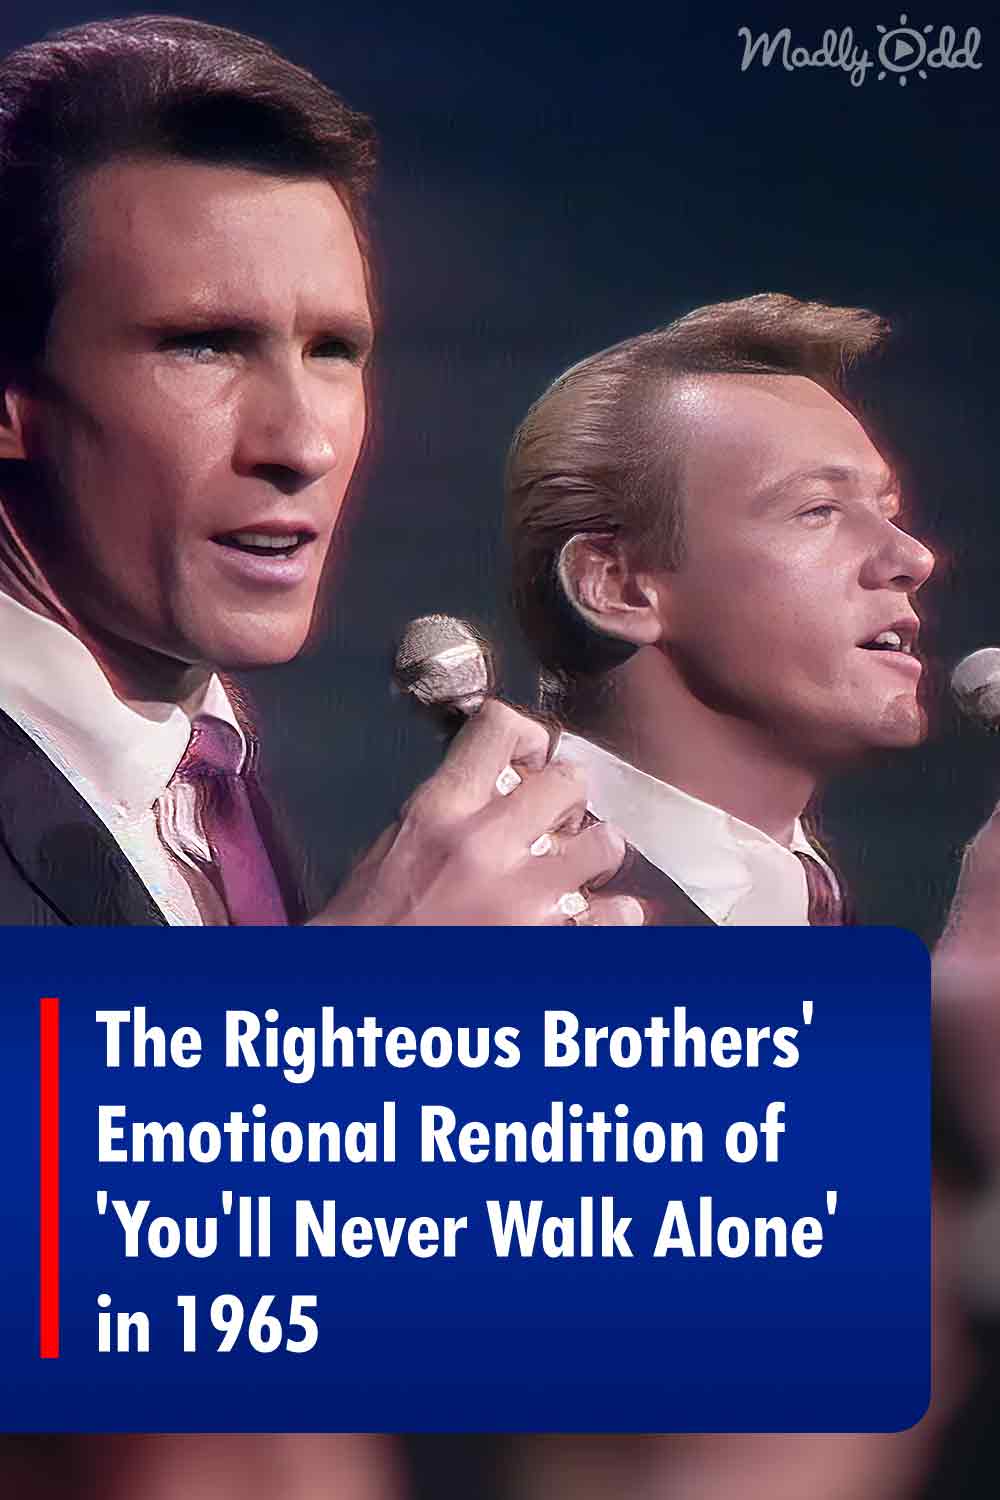 The Righteous Brothers\' Emotional Rendition of \'You\'ll Never Walk Alone\' in 1965